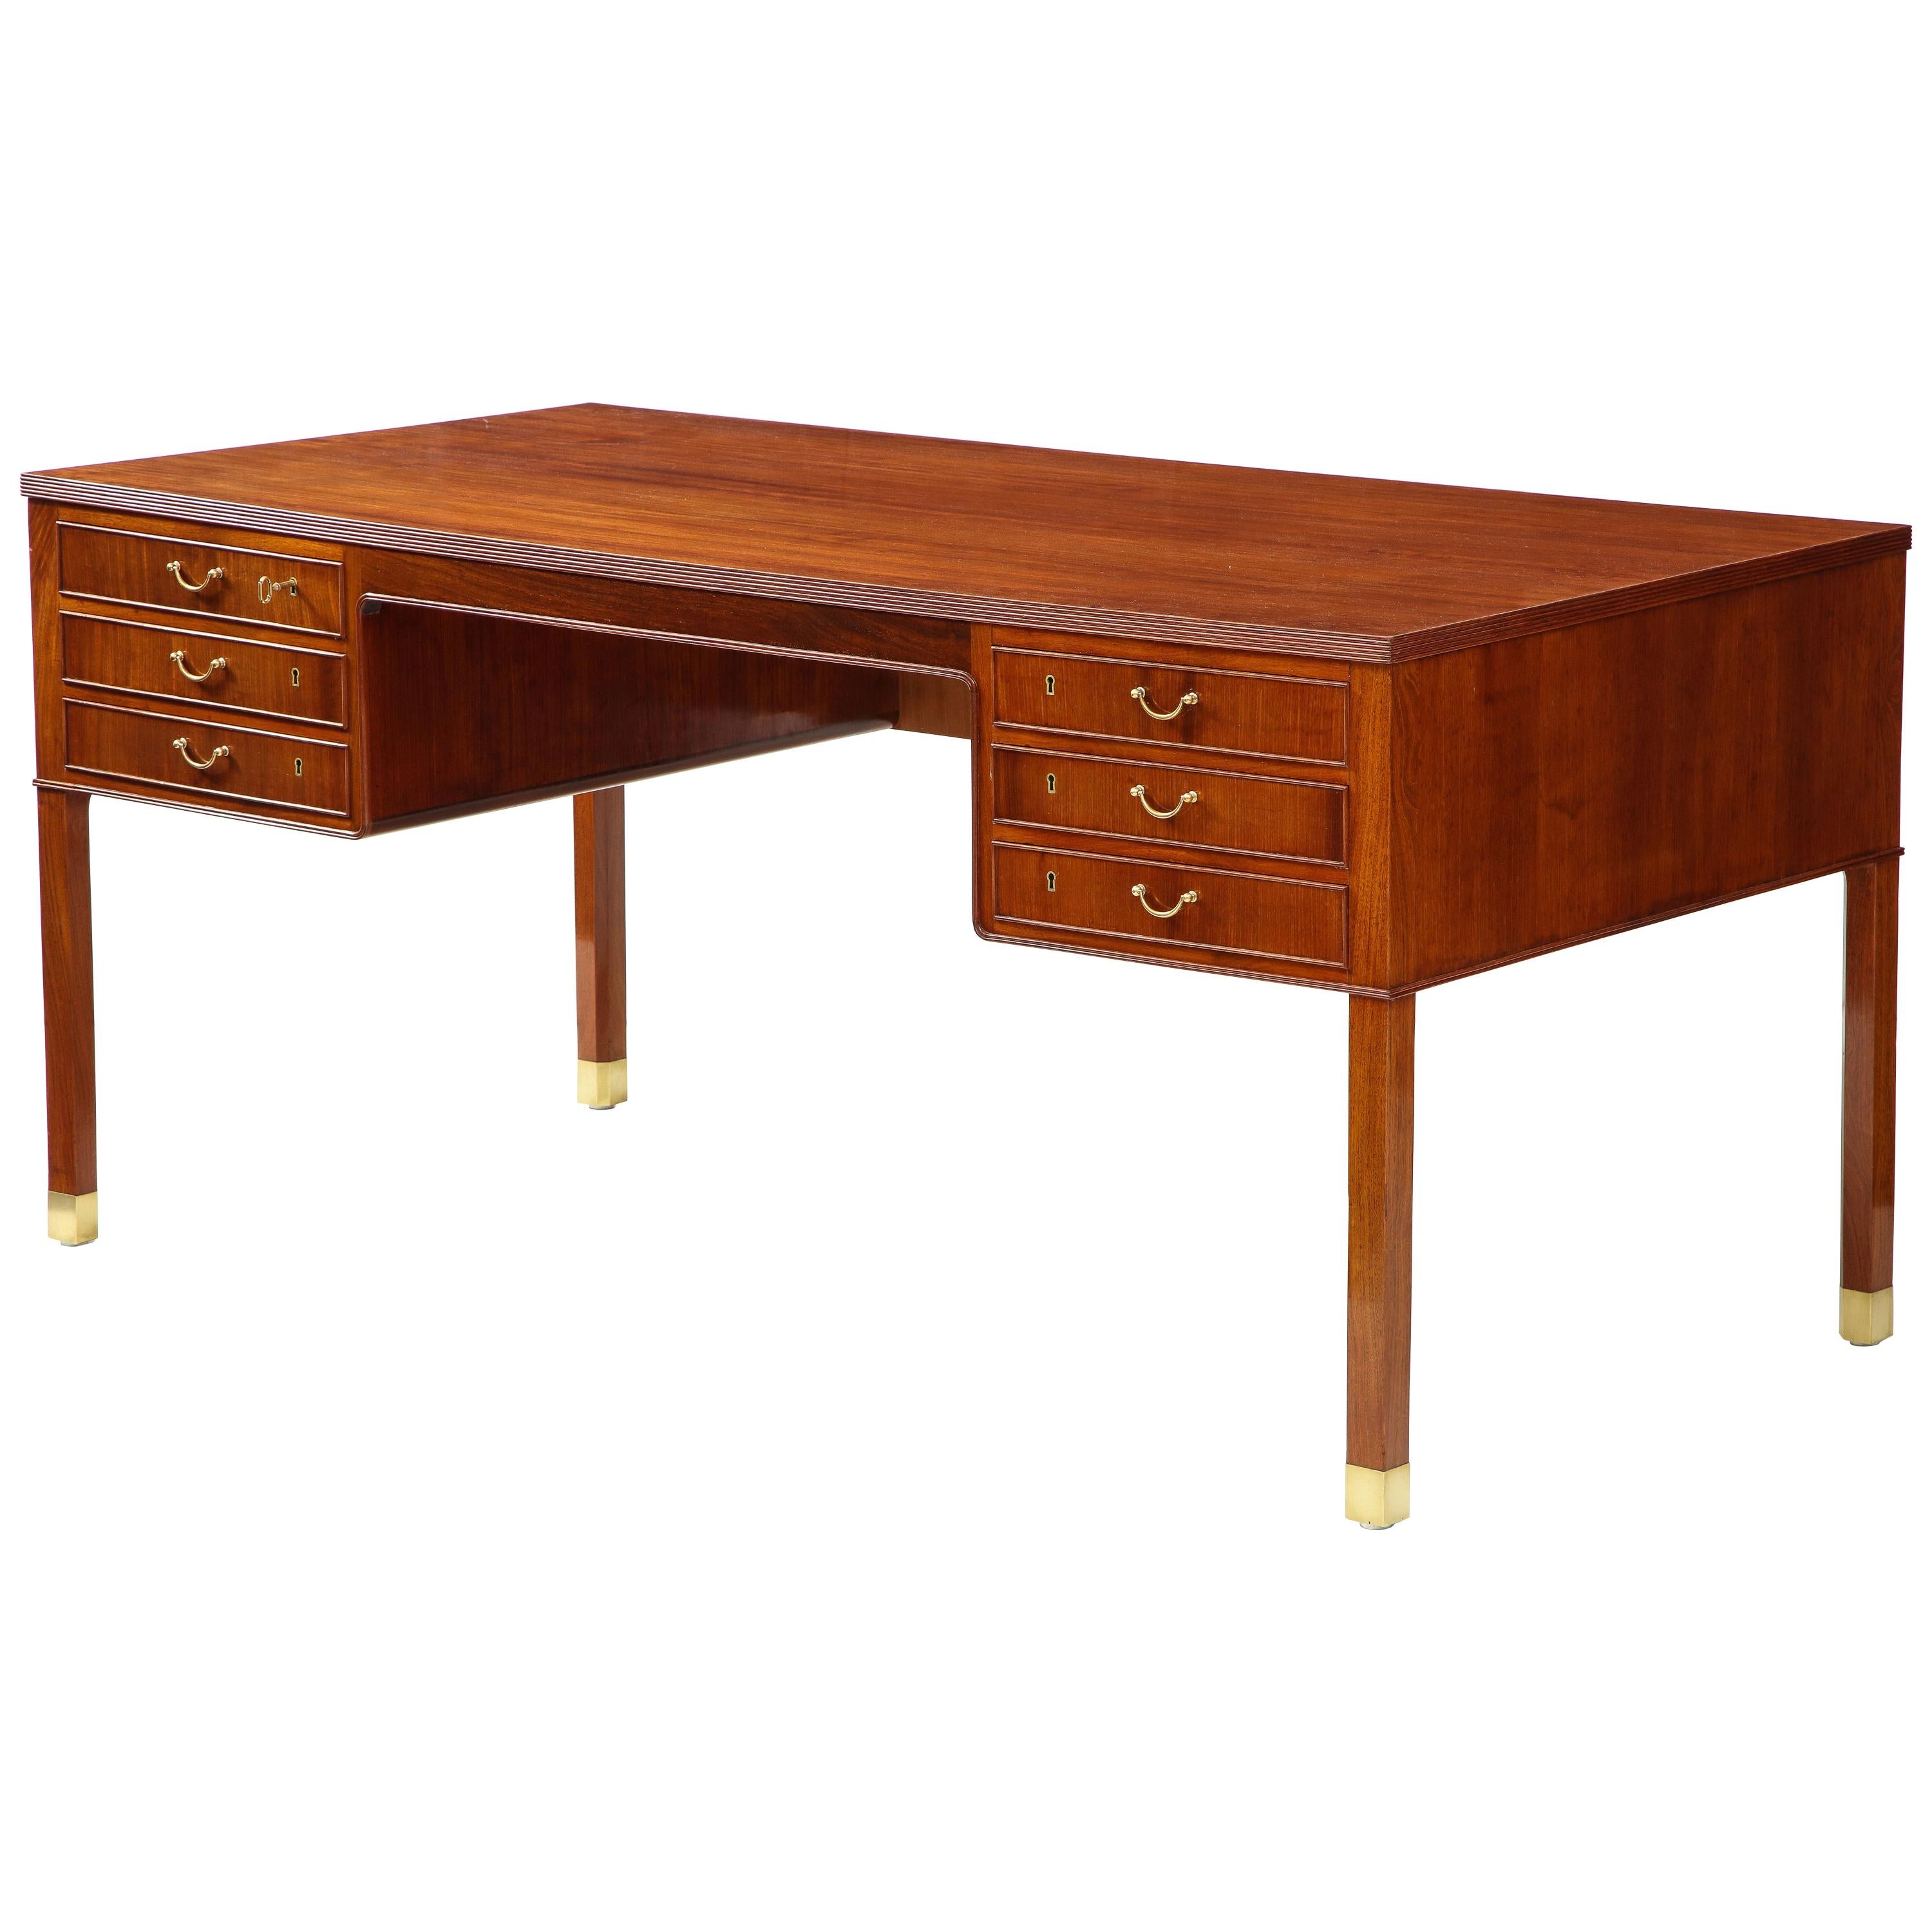 Ole Wanscher Mahogany Desk, circa 1950s, Produced by A. J. Iversen